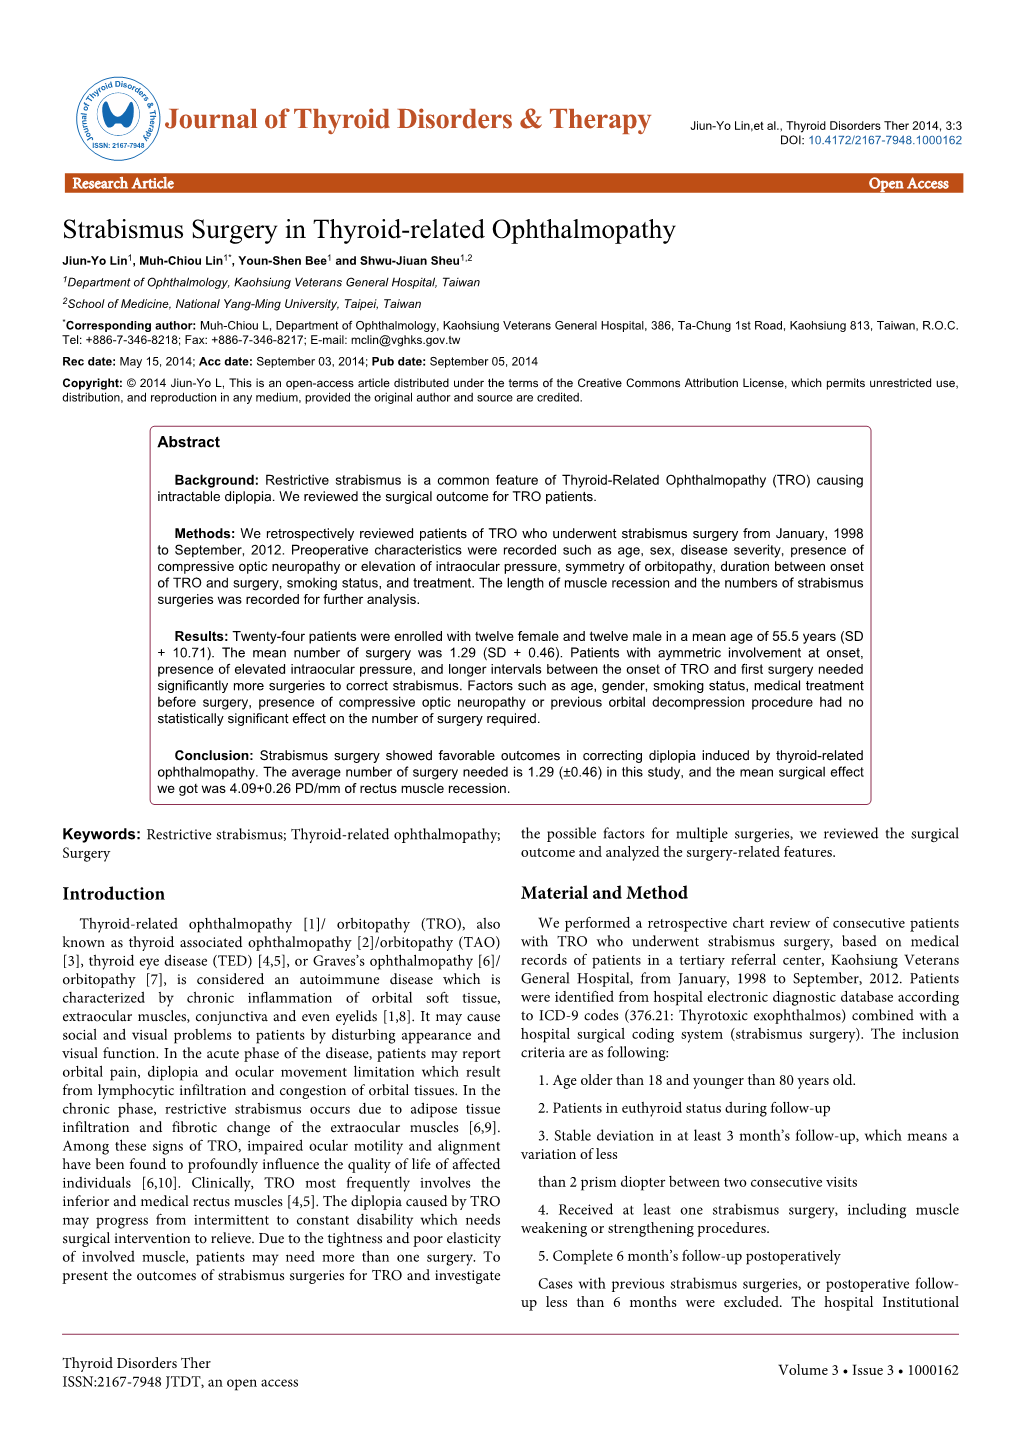 Strabismus Surgery in Thyroid-Related Ophthalmopathy